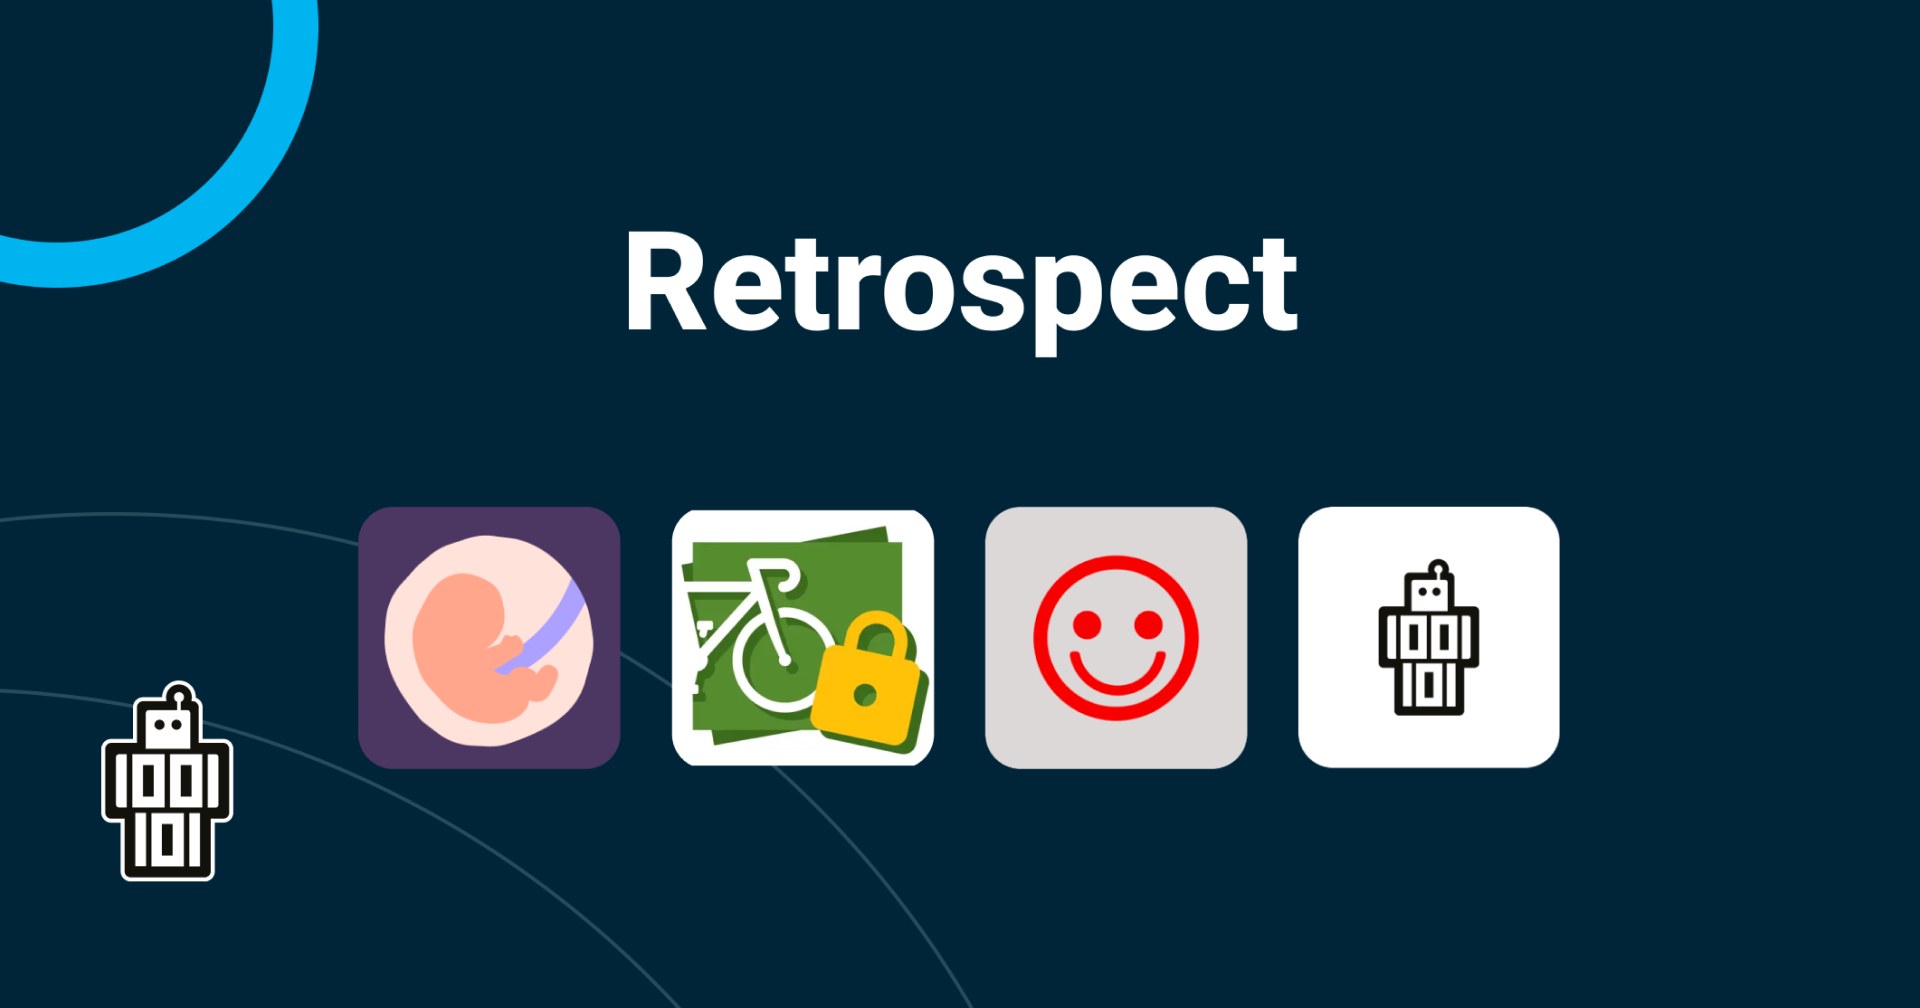 Retrospect Q1 - Our update about the latest developments of 9to5